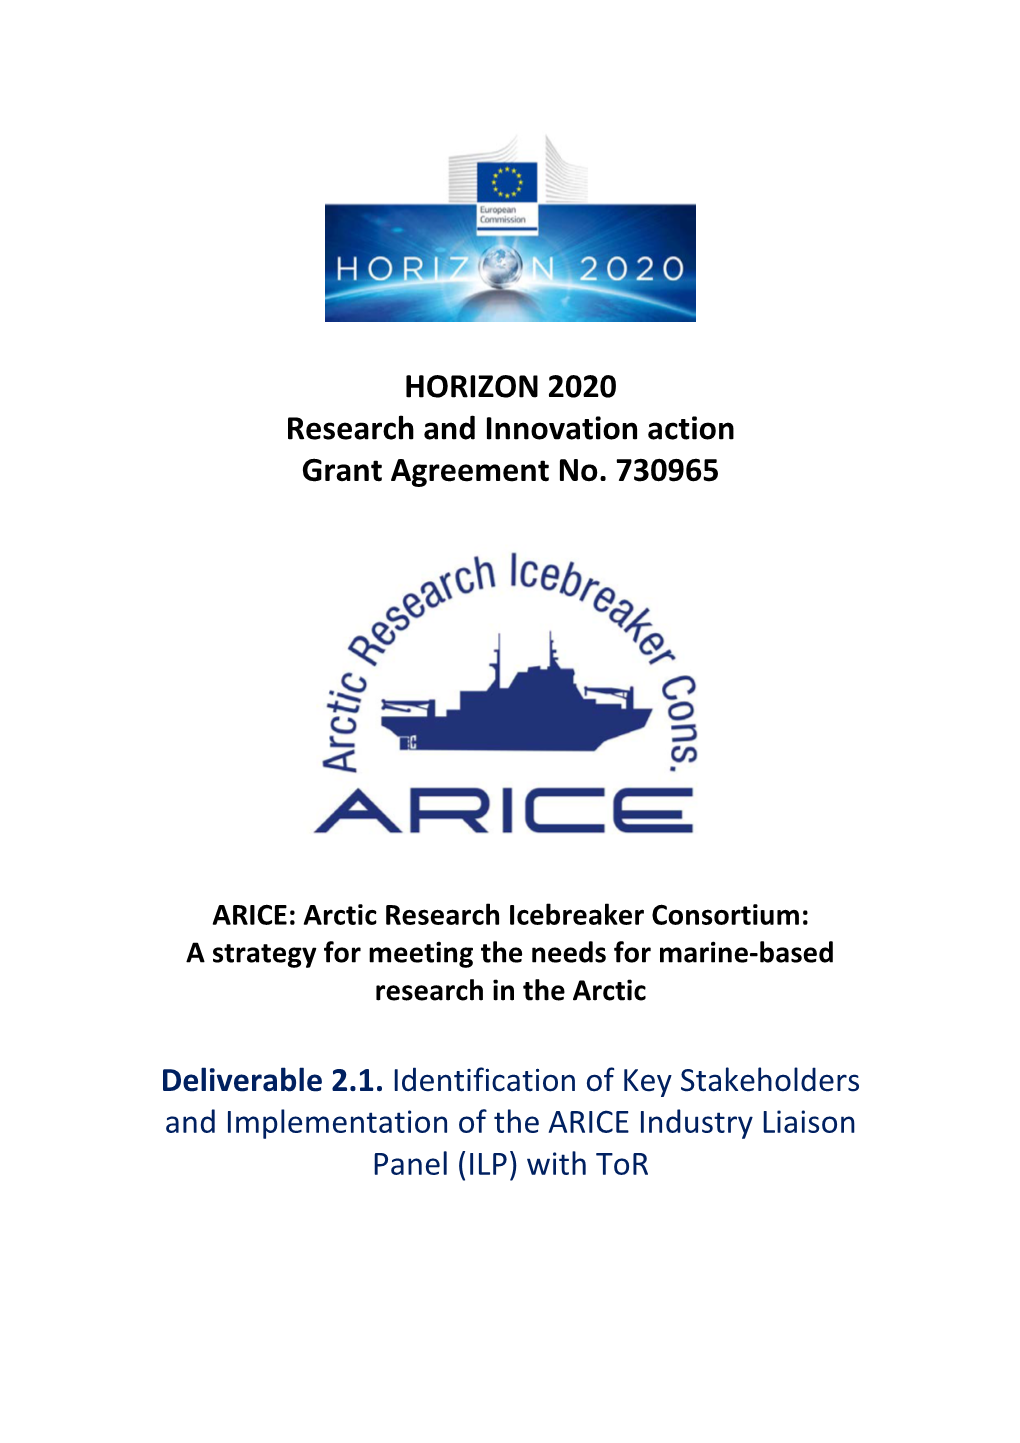 Identification of Key Stakeholders and Implementation of the ARICE Industry Liaison Panel (ILP) with Tor